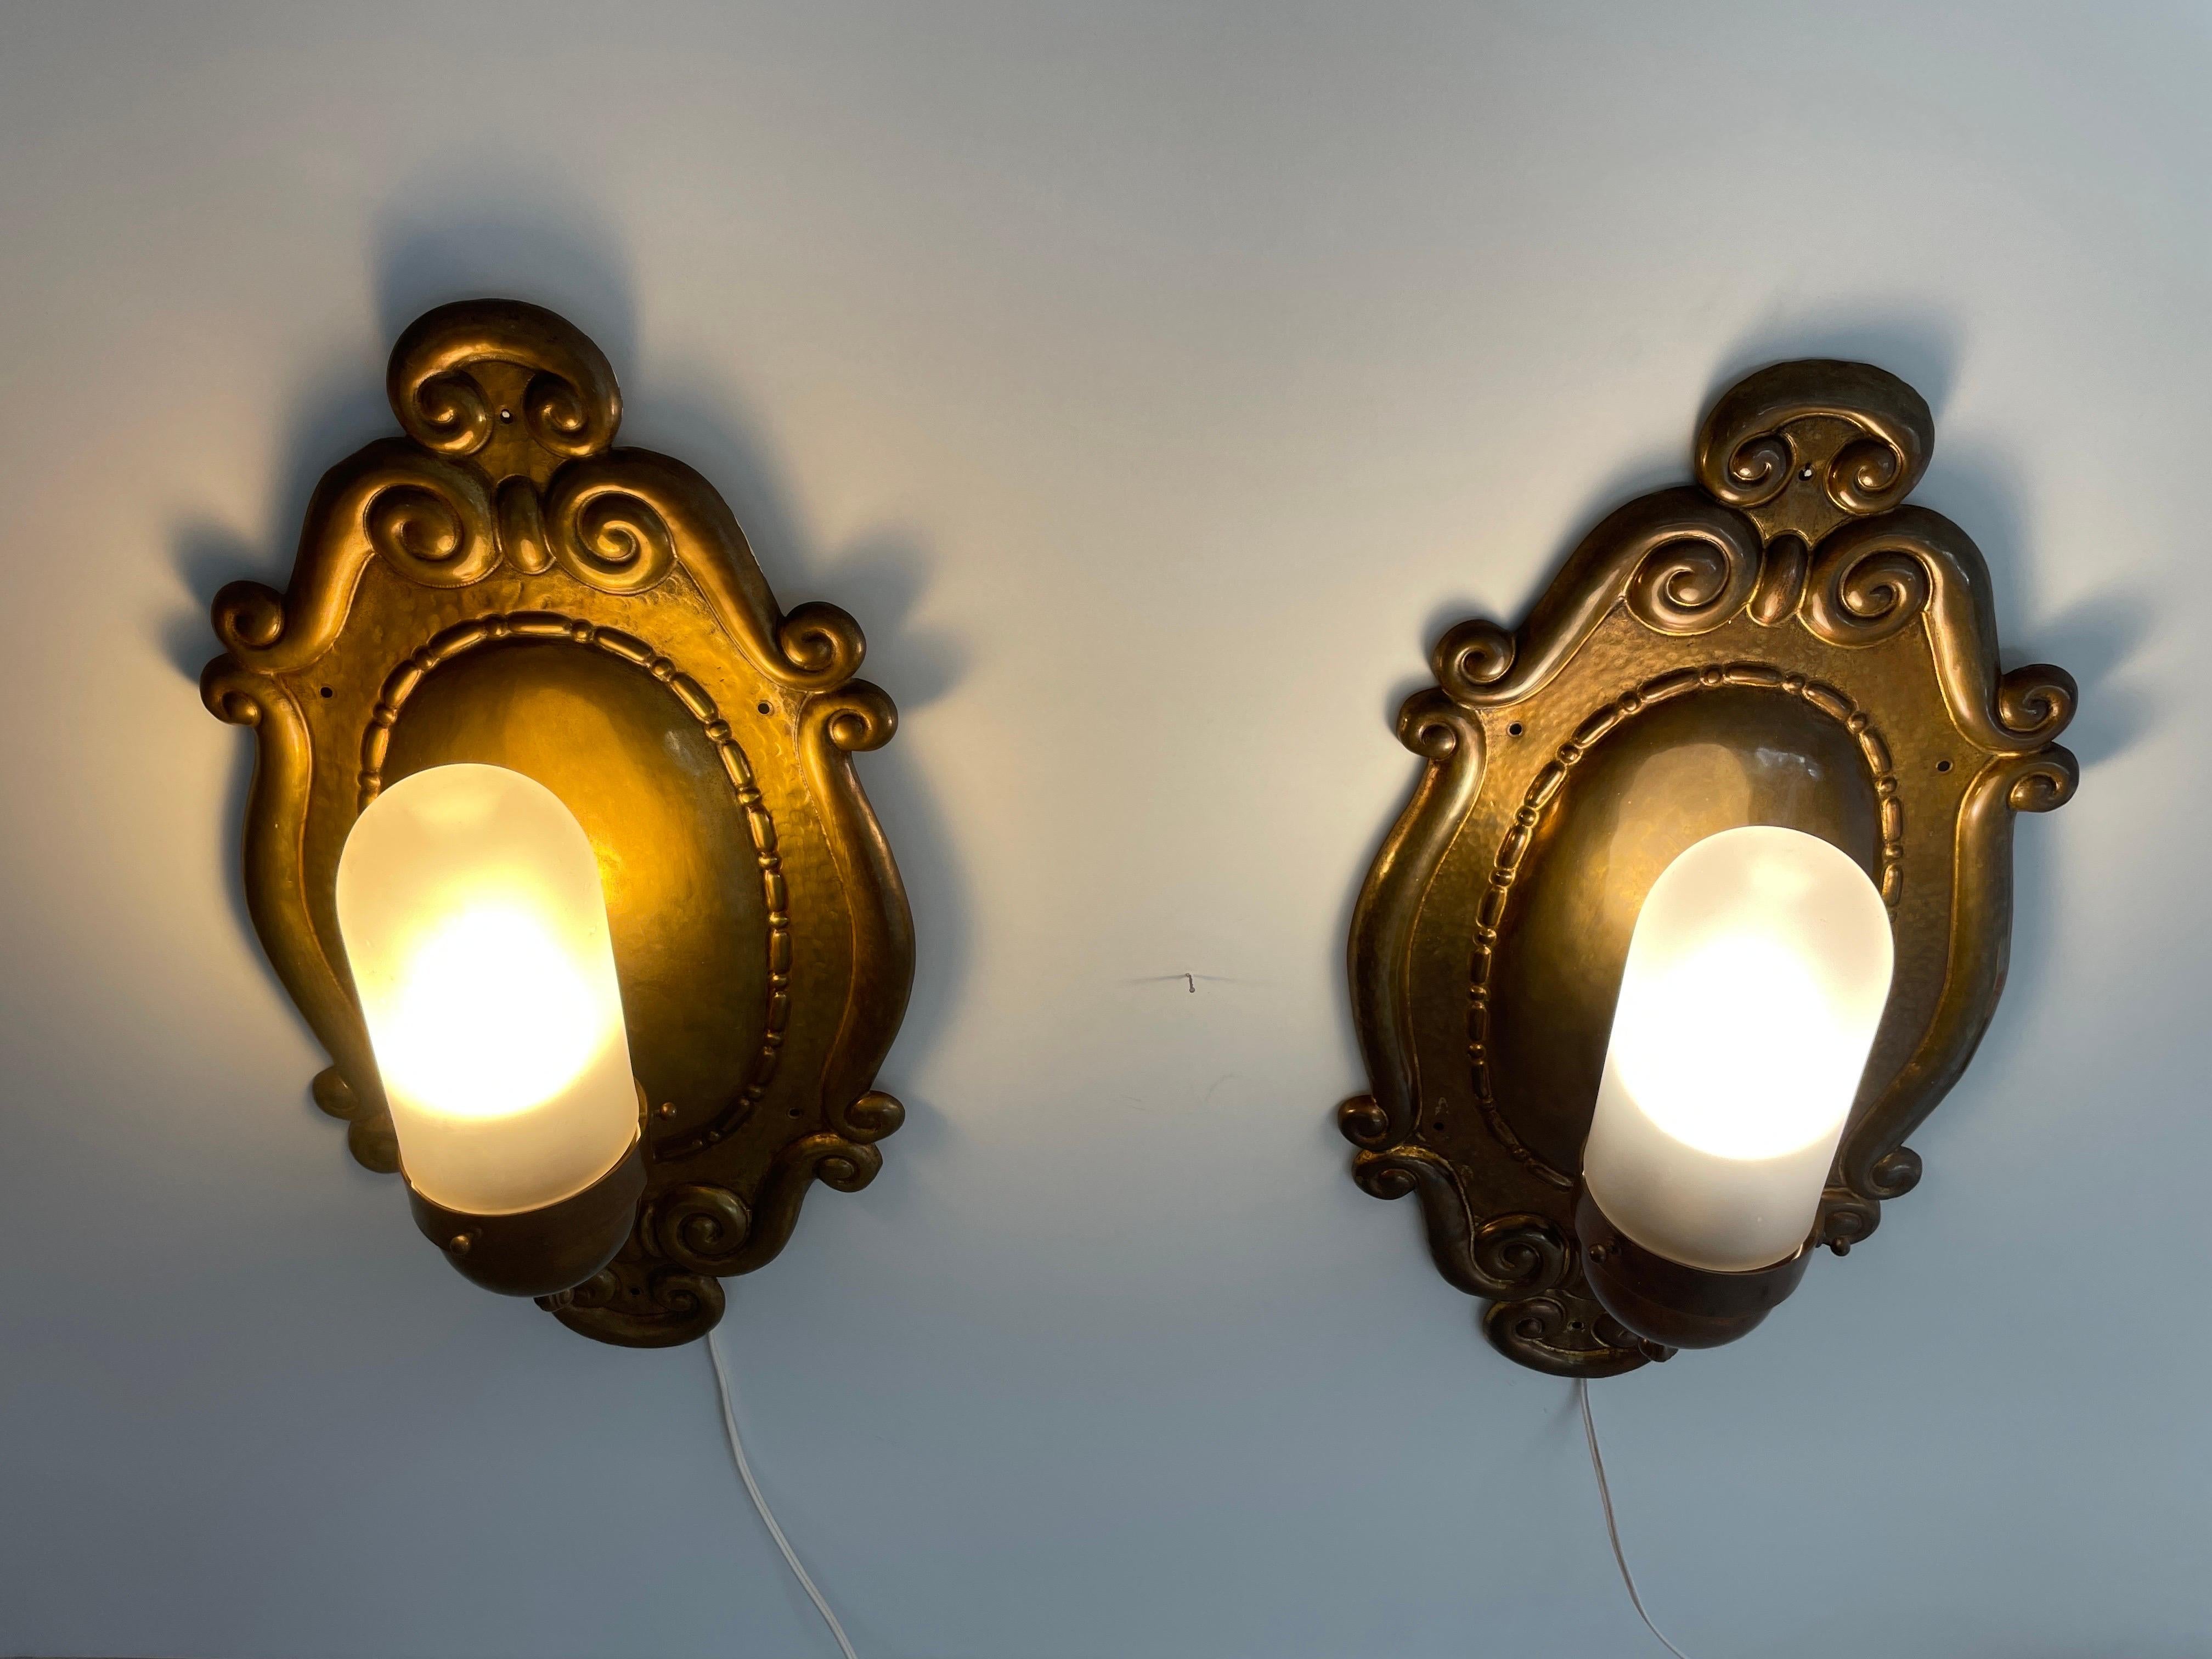 Exceptional Art Deco Glass and Copper Body Pair of Sconces, 1940s, Germany For Sale 4